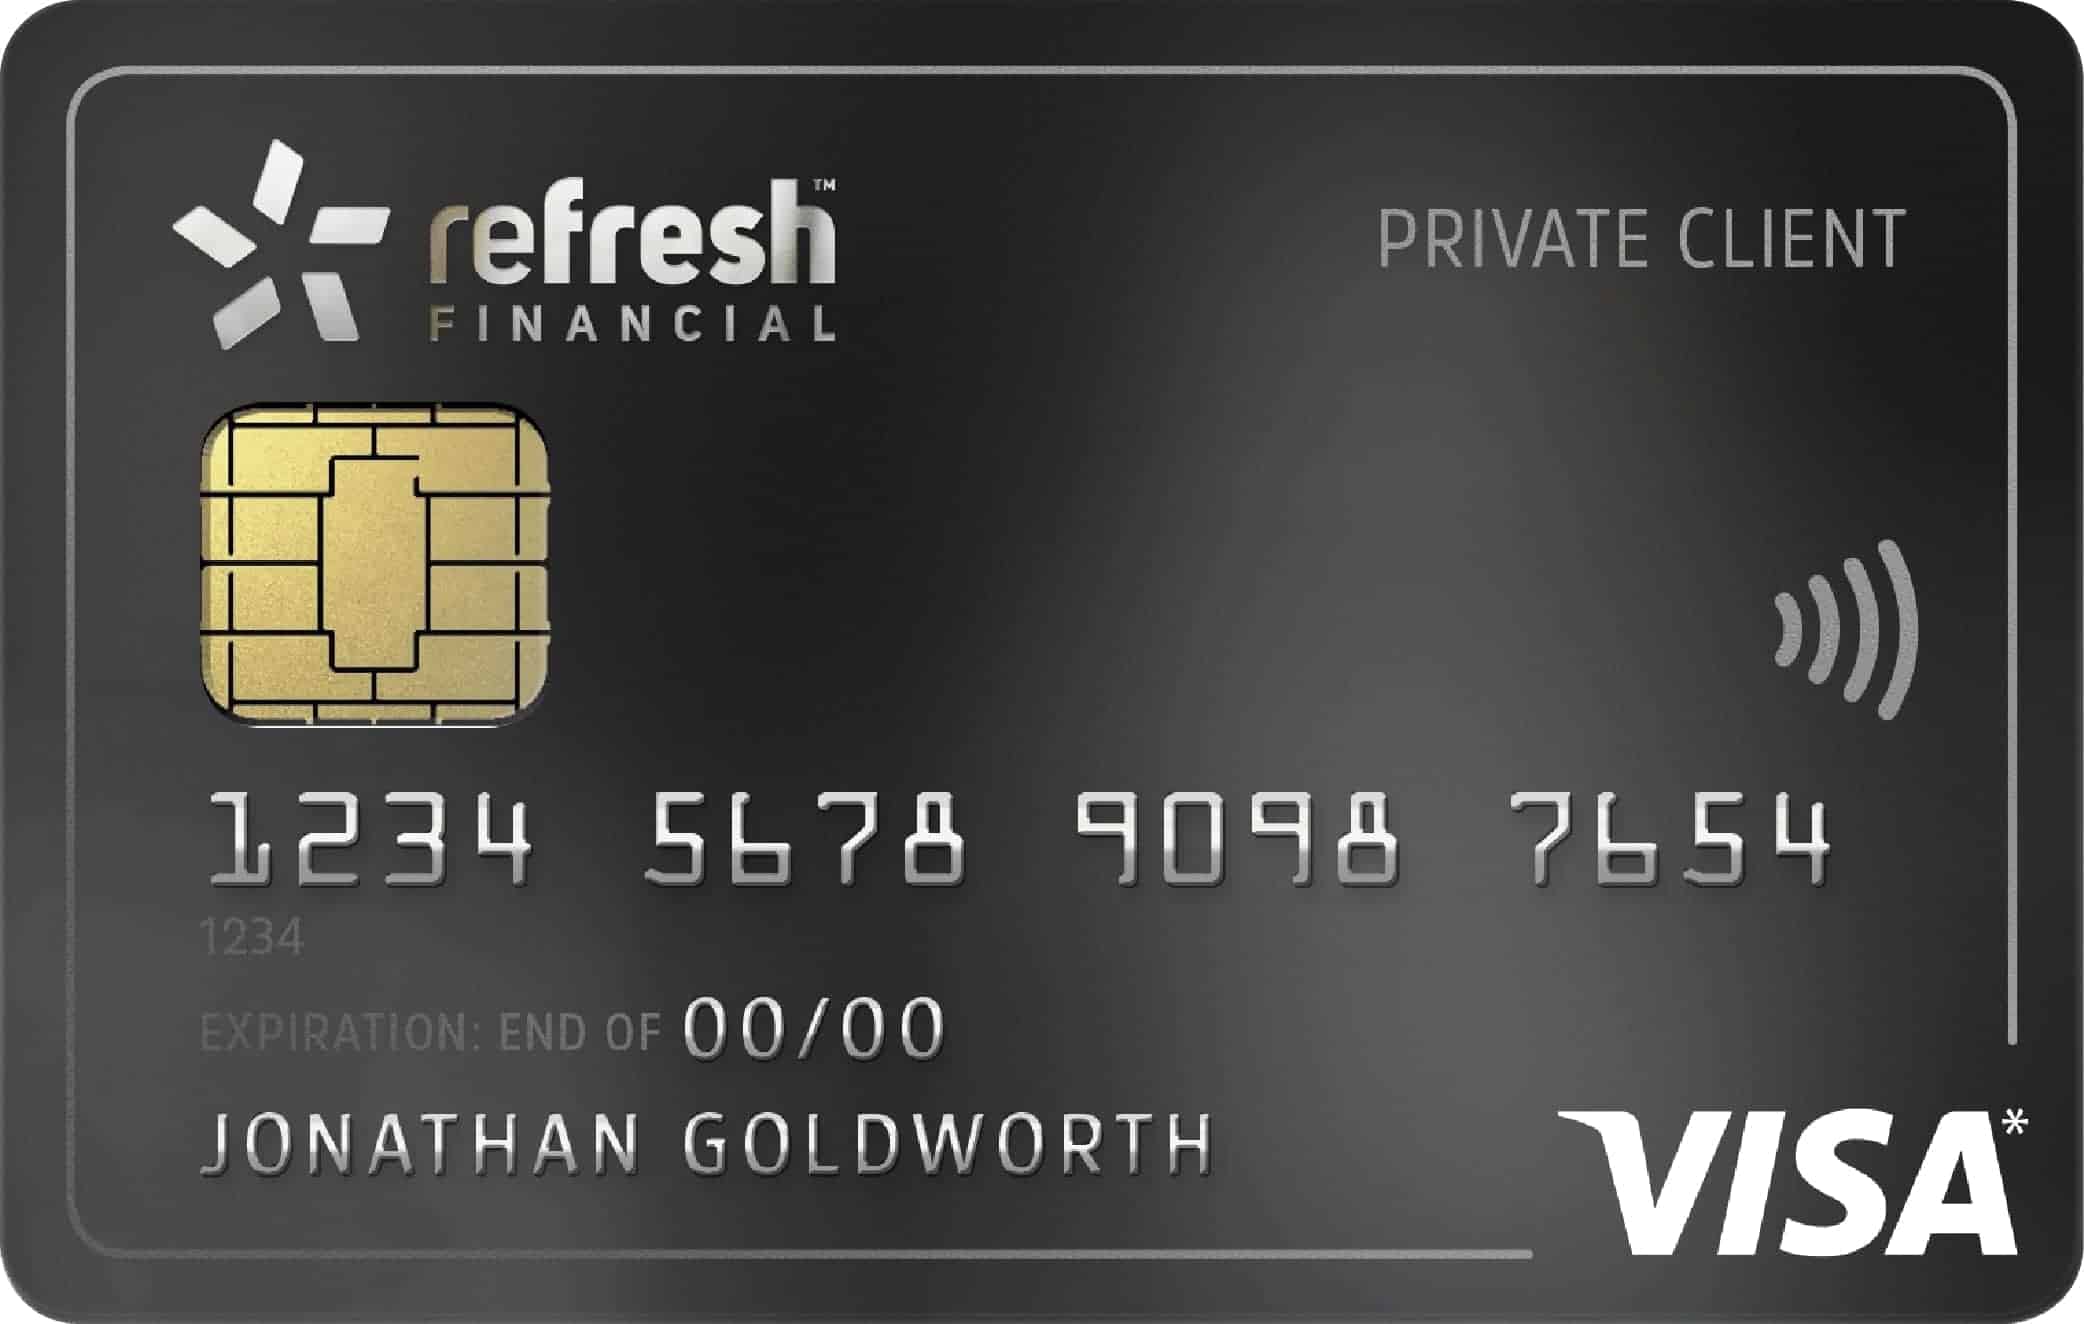 Refresh Financial Secured Card - Learn How to Apply Today and Build Credit